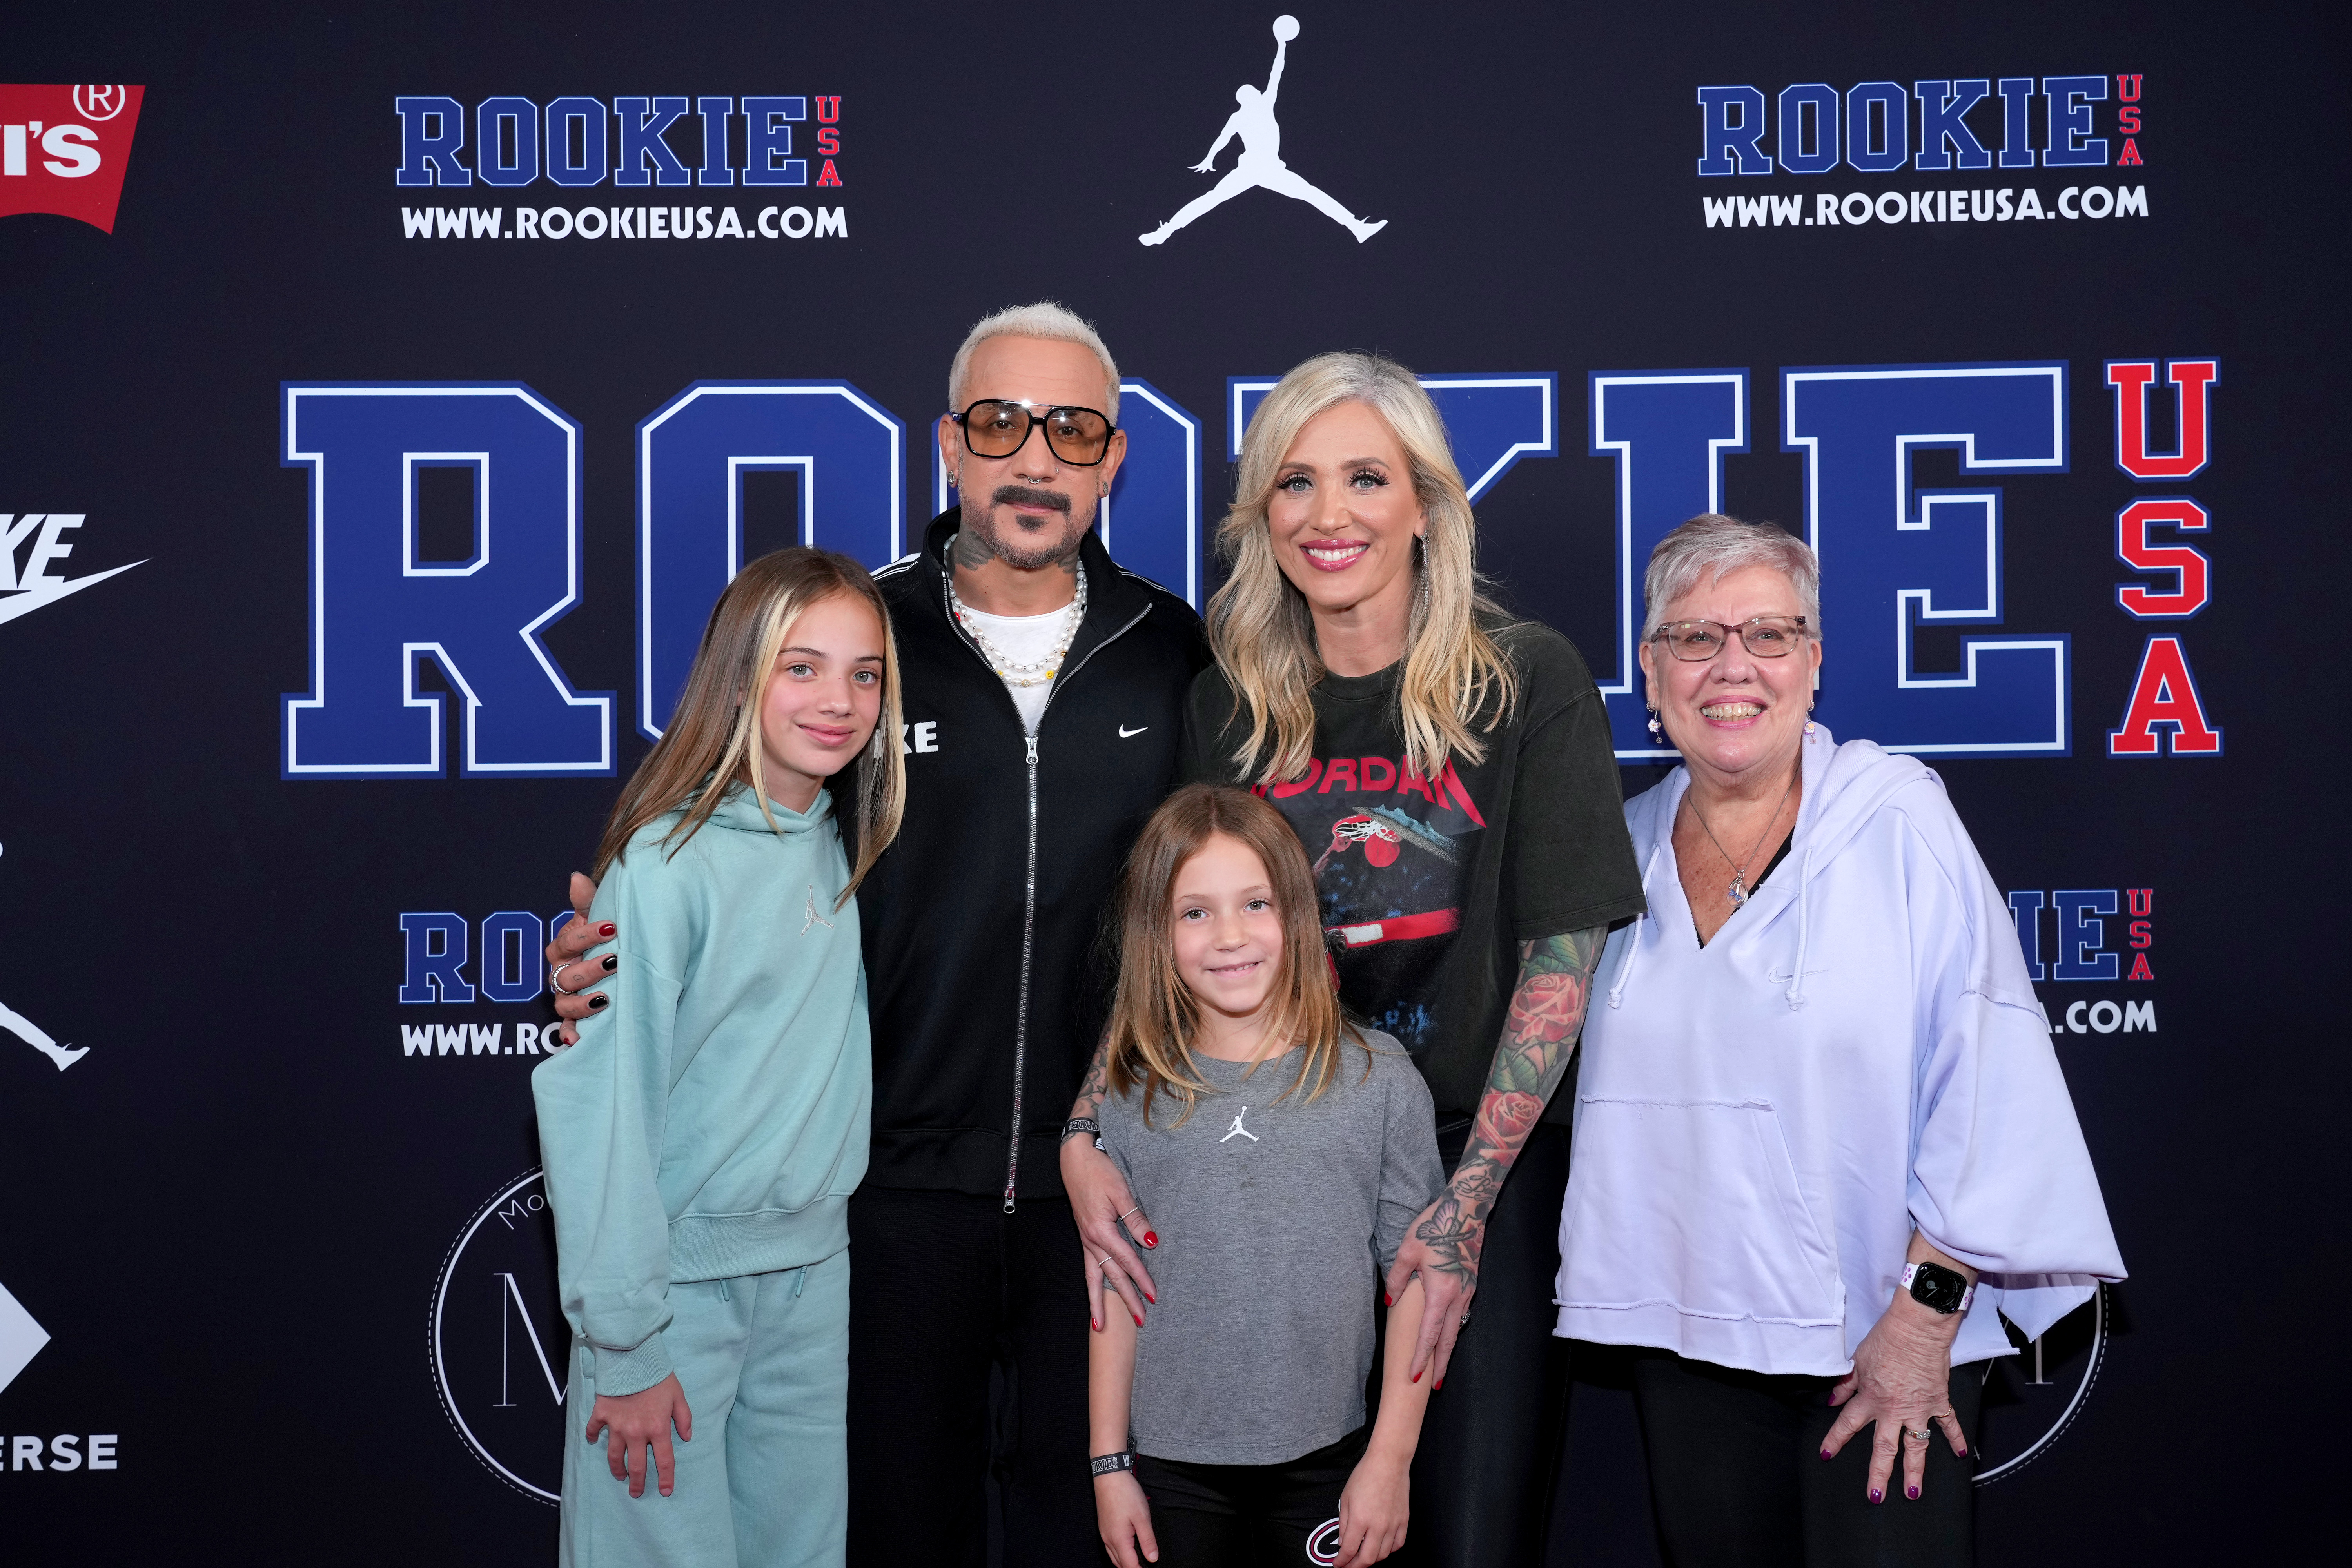 AJ with his wife Rochelle DeAnna McLean their children Elliot and Lyric, and his mom Denise McLean attend the 13th Annual Rookie USA Fashion Show at Iron 23 on September 06, 2023, in New York City